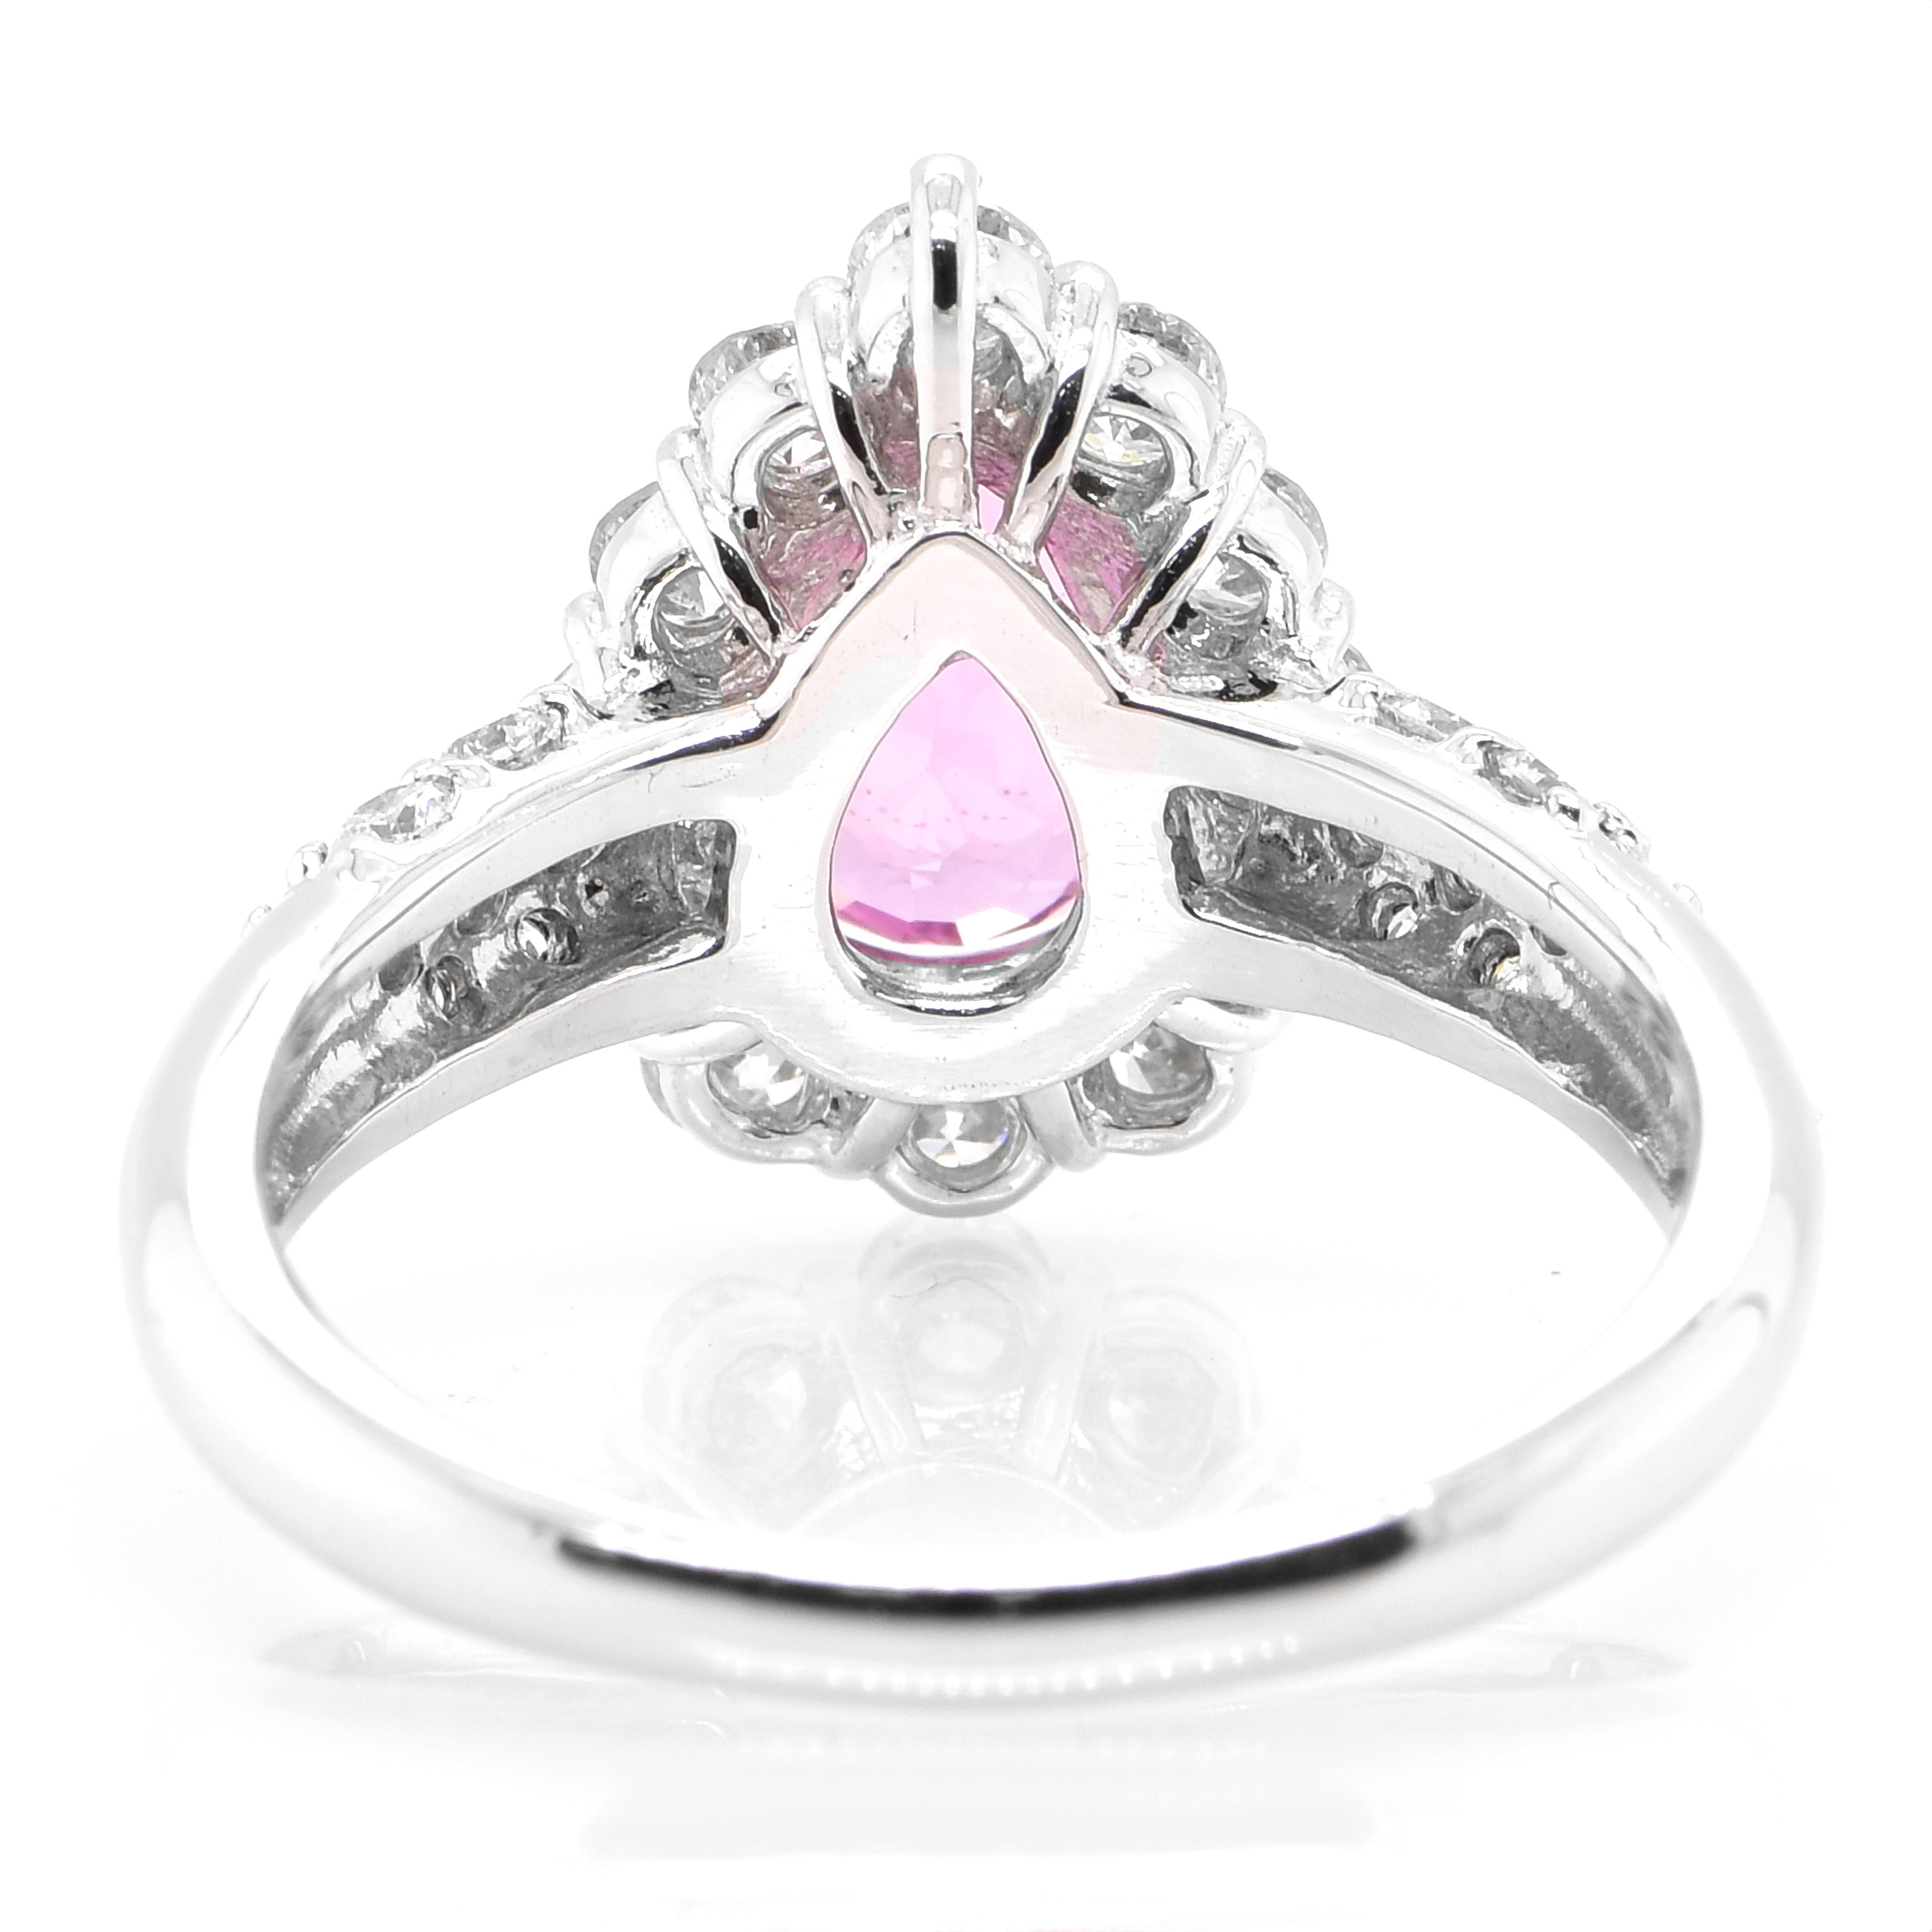 Women's 1.61 Carat, Natural, Pear Padparadscha Sapphire and Diamond Ring set in Platinum For Sale